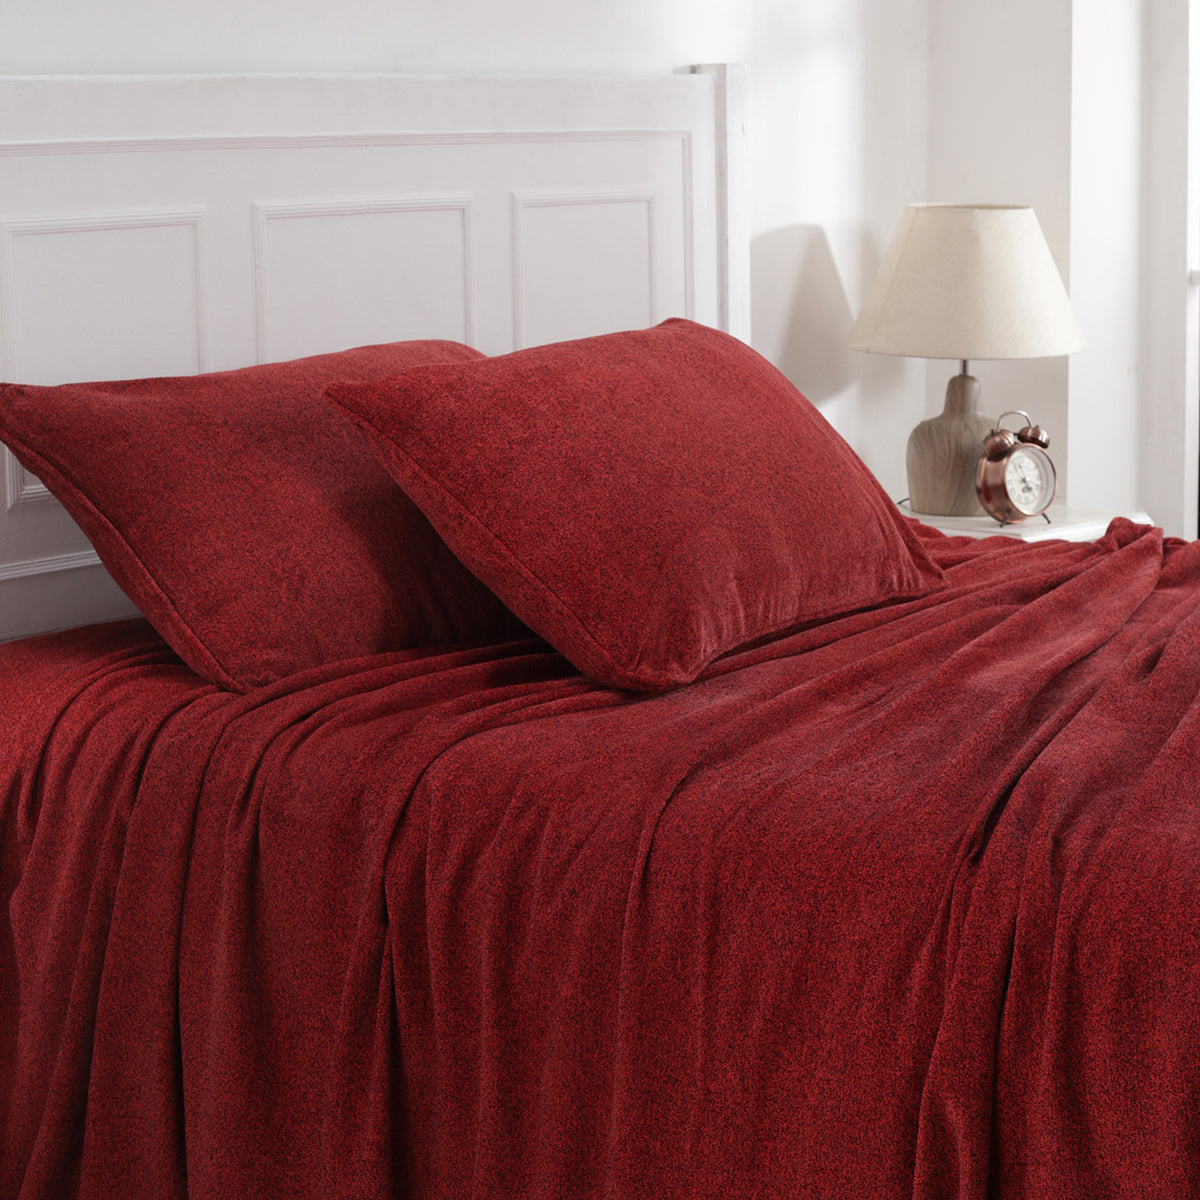 Charlotte Woven Real Red/Black Bed Cover/Blanket